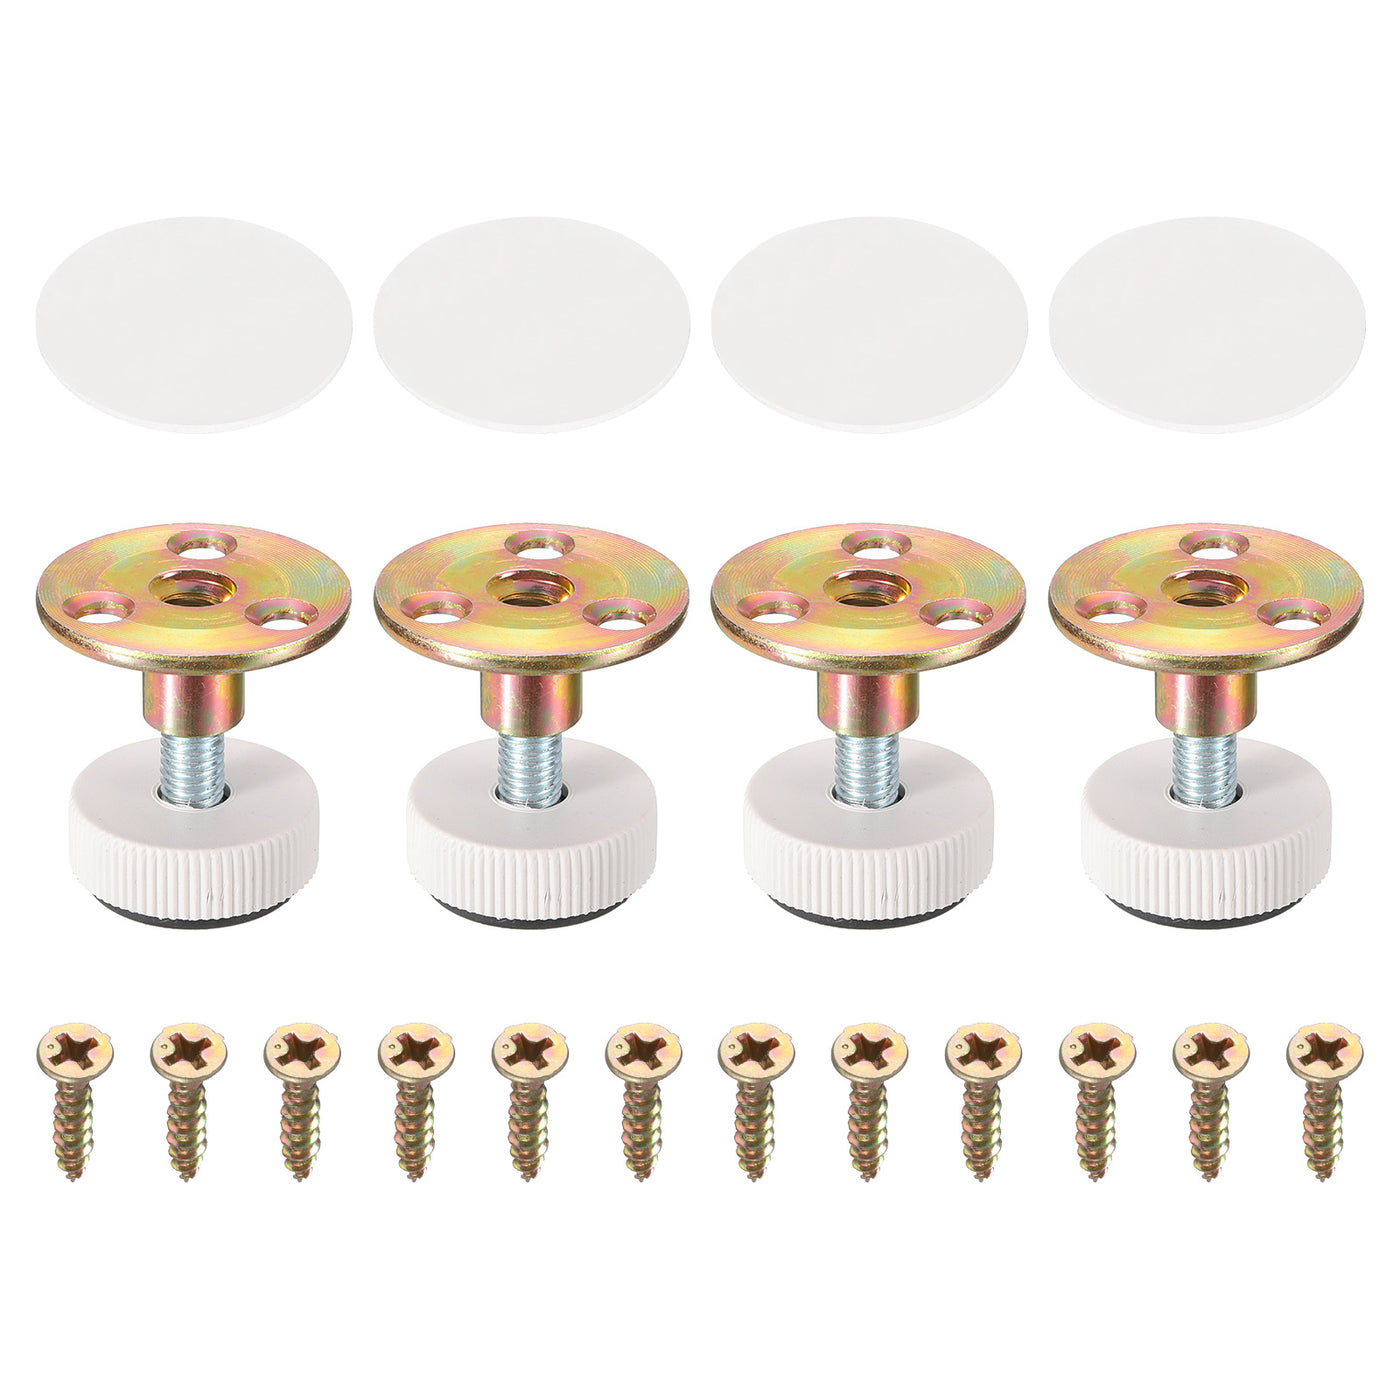 uxcell Uxcell Thread Furniture Leveling Feet, 4Pcs - Adjustable Furniture Feet Levelers, Self-adhesive Threaded Screw-in Raised Base for Tables Sofas (30 x 12 MM)